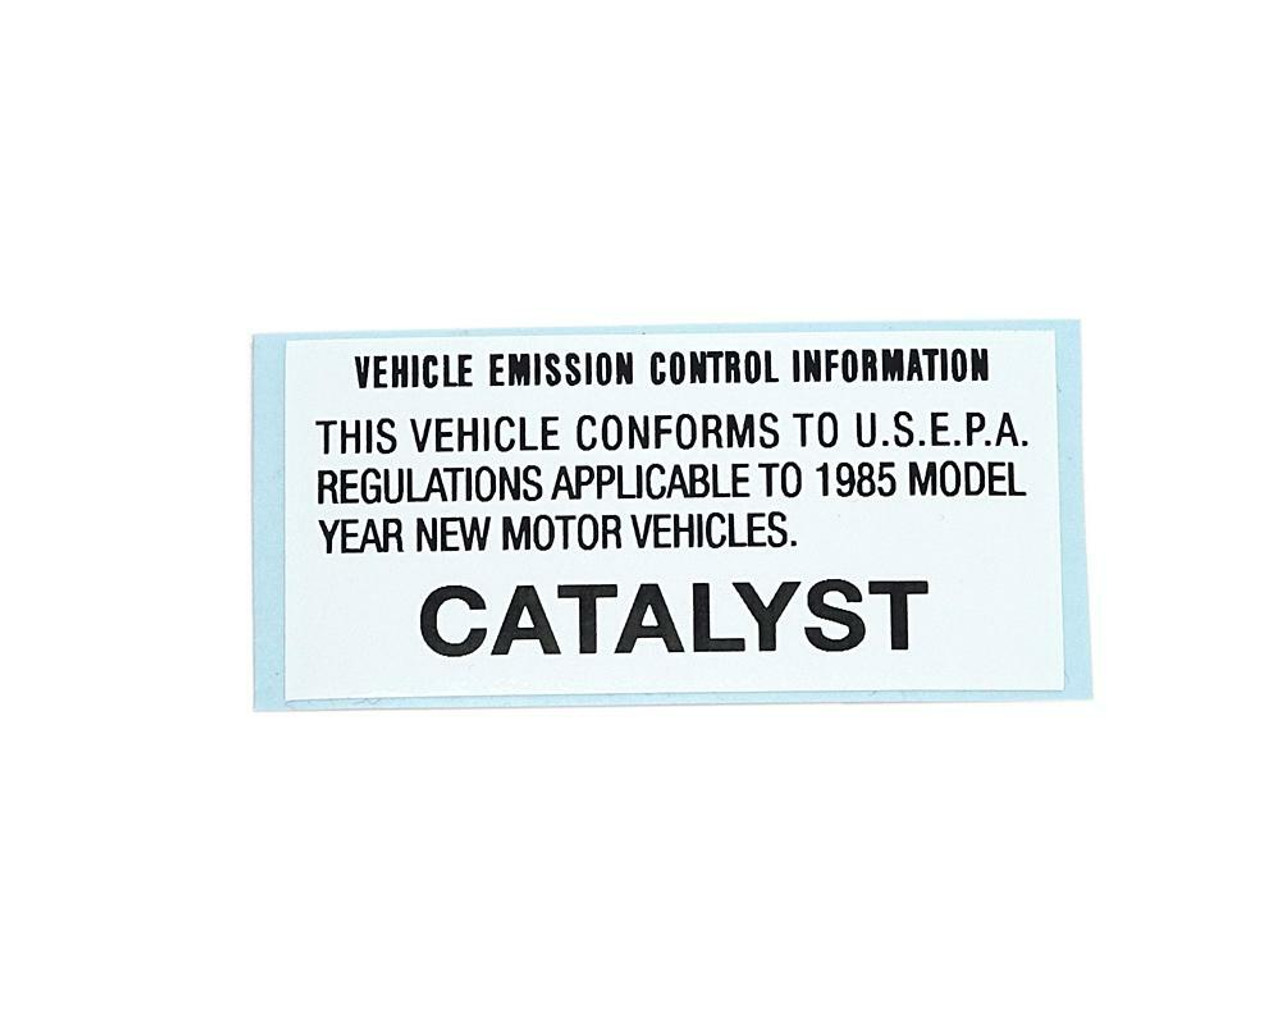 Vehicle emission control information / CATALYST decal
FIAT 124 Spider Pininfarina - 1985
FIAT and Bertone X1/9 - 1985
Auto Ricambi
RS0-139